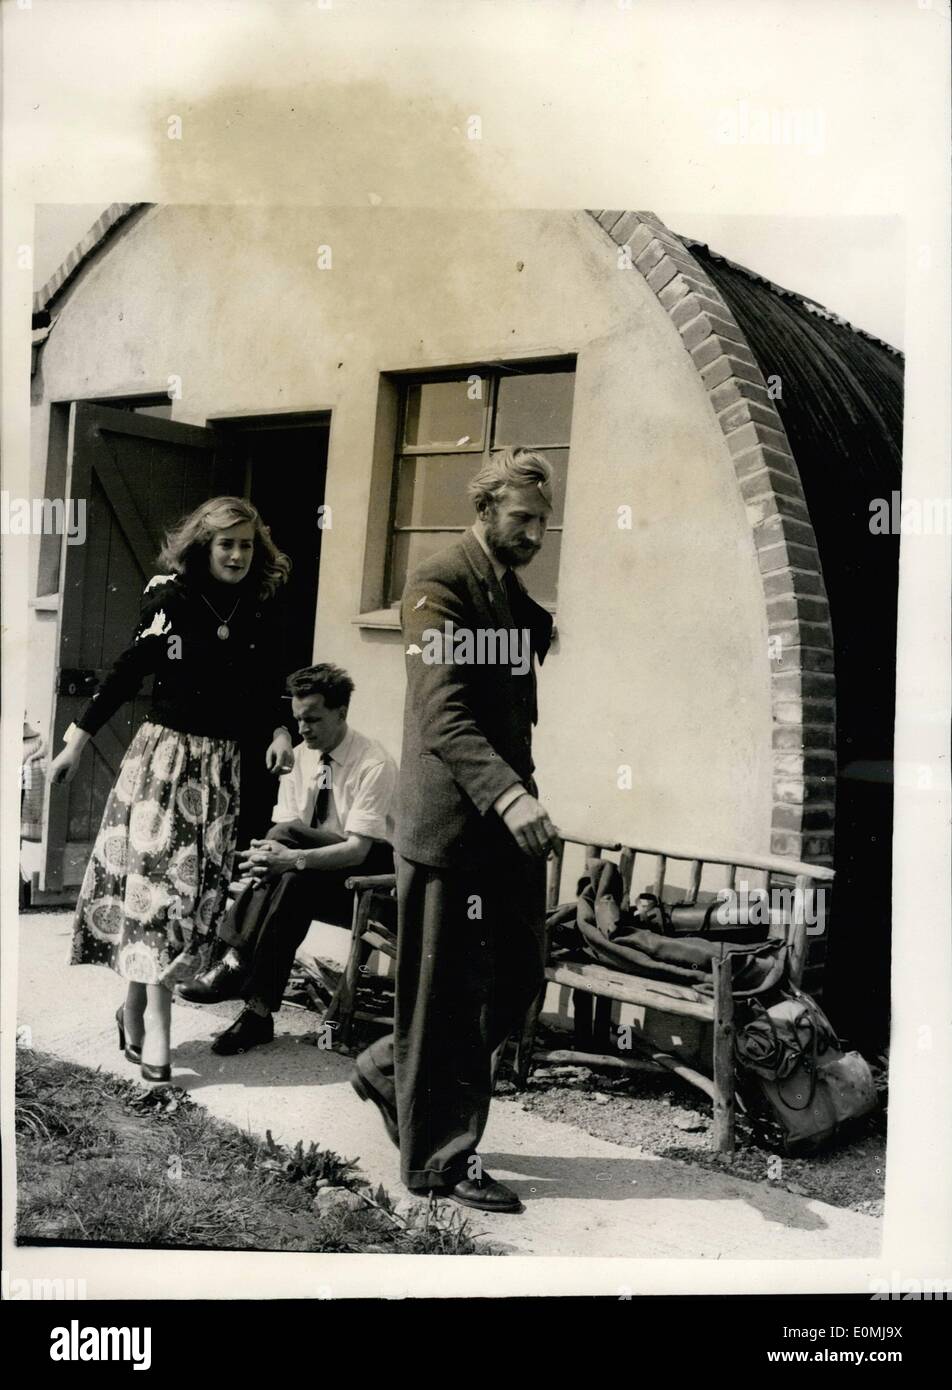 Jun. 06, 1955 - Lord Geoffrey Percy and his bride.: Beared 30 - years old Lord Geoffrey Percy, brother of the Duke Of Northumberland, photographed with his bride - the former Miss Mary Lea, who keeps the store and tavern on Lundy Island, off the North Devon Mainland. The couple were secretly married by special licence at Bideford ( N. Devon) Register Office on Friday last. Stock Photo